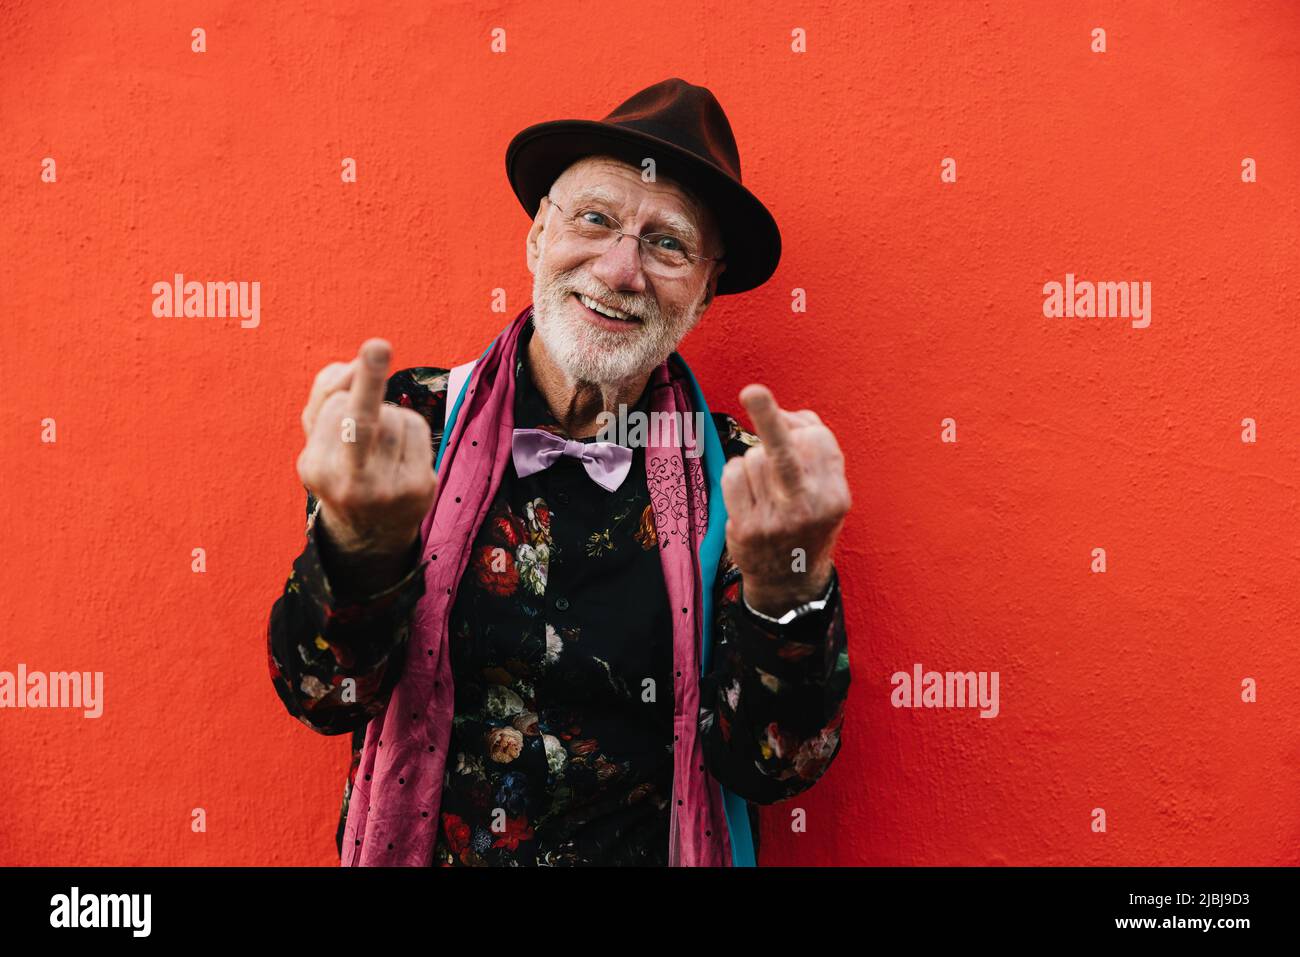 Carefree senior man showing his middle fingers while standing against a red background. Mature man looking at the camera while making a swear gesture. Stock Photo